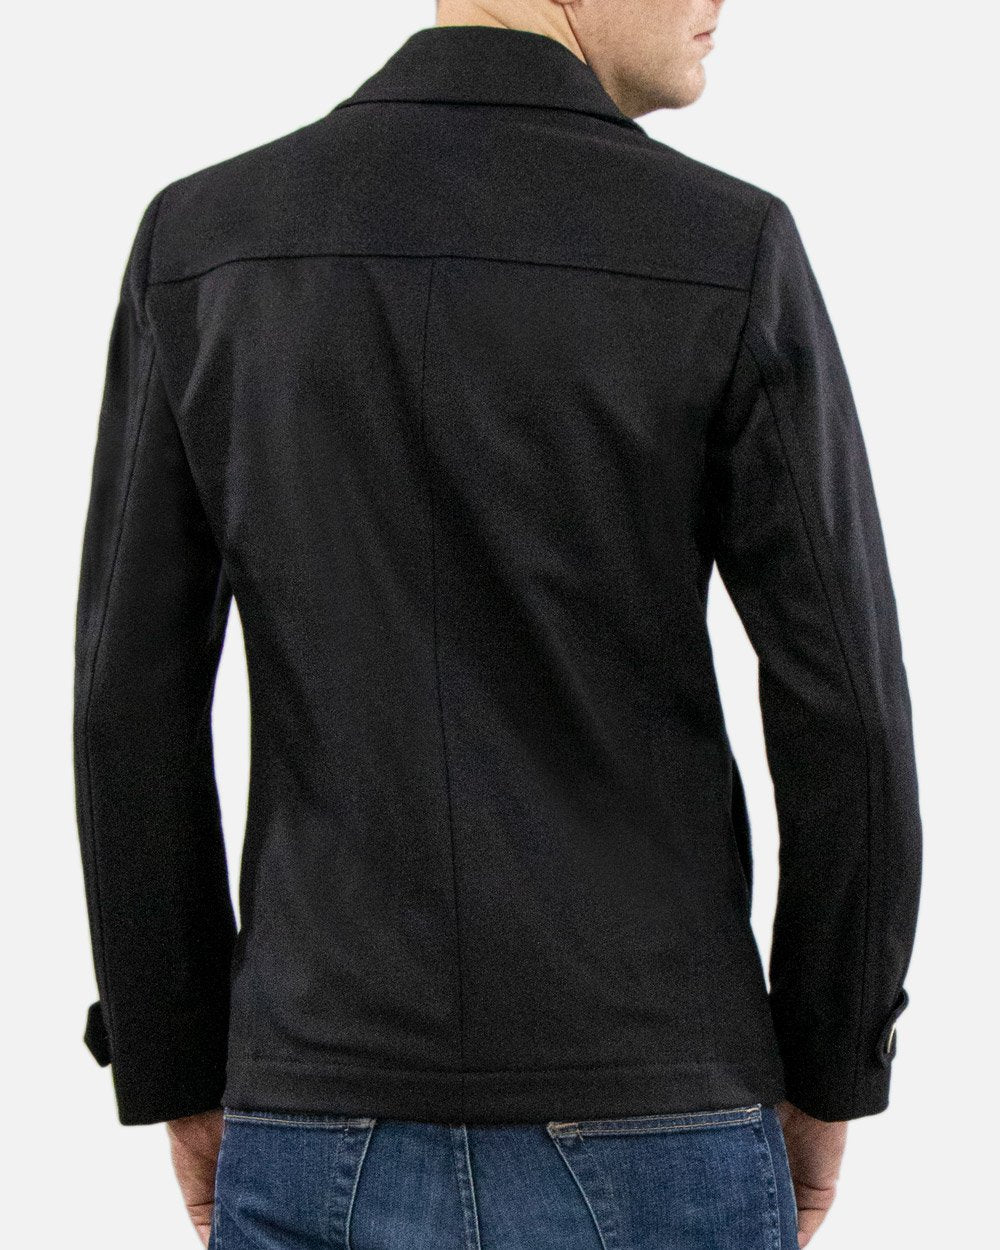 CAMIO Jacket - ISSI Outlet